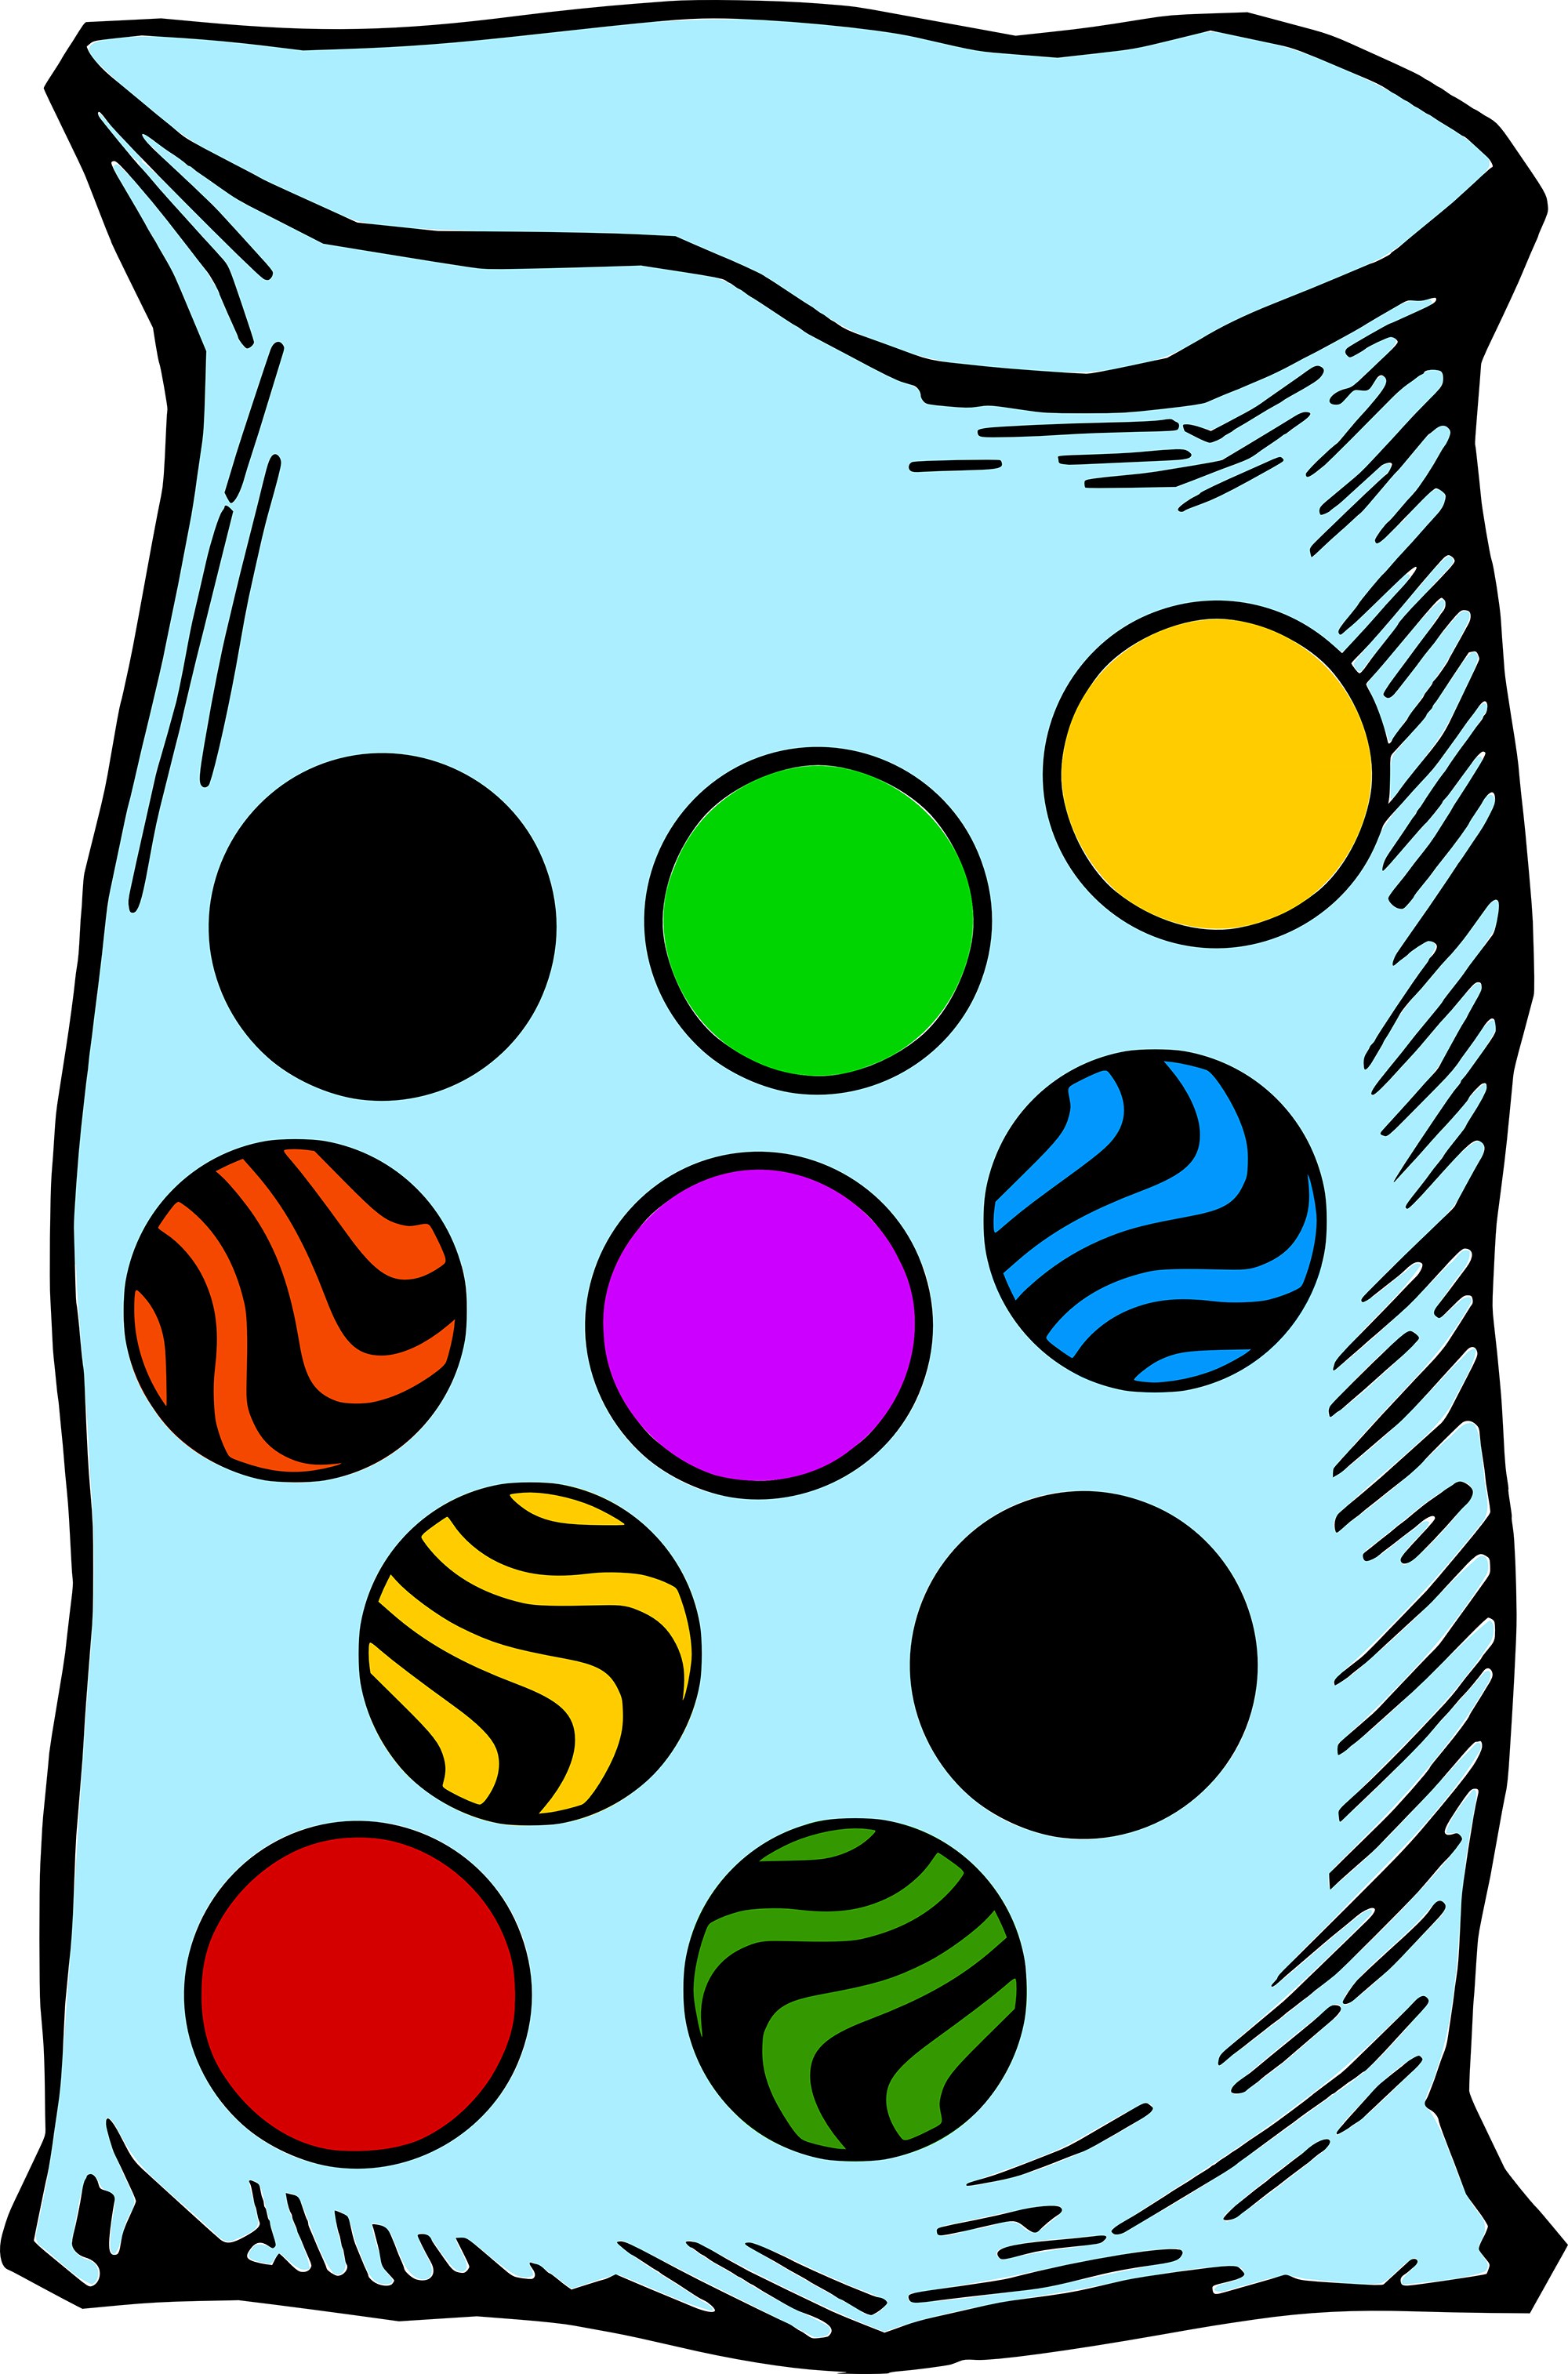 marbles clipart